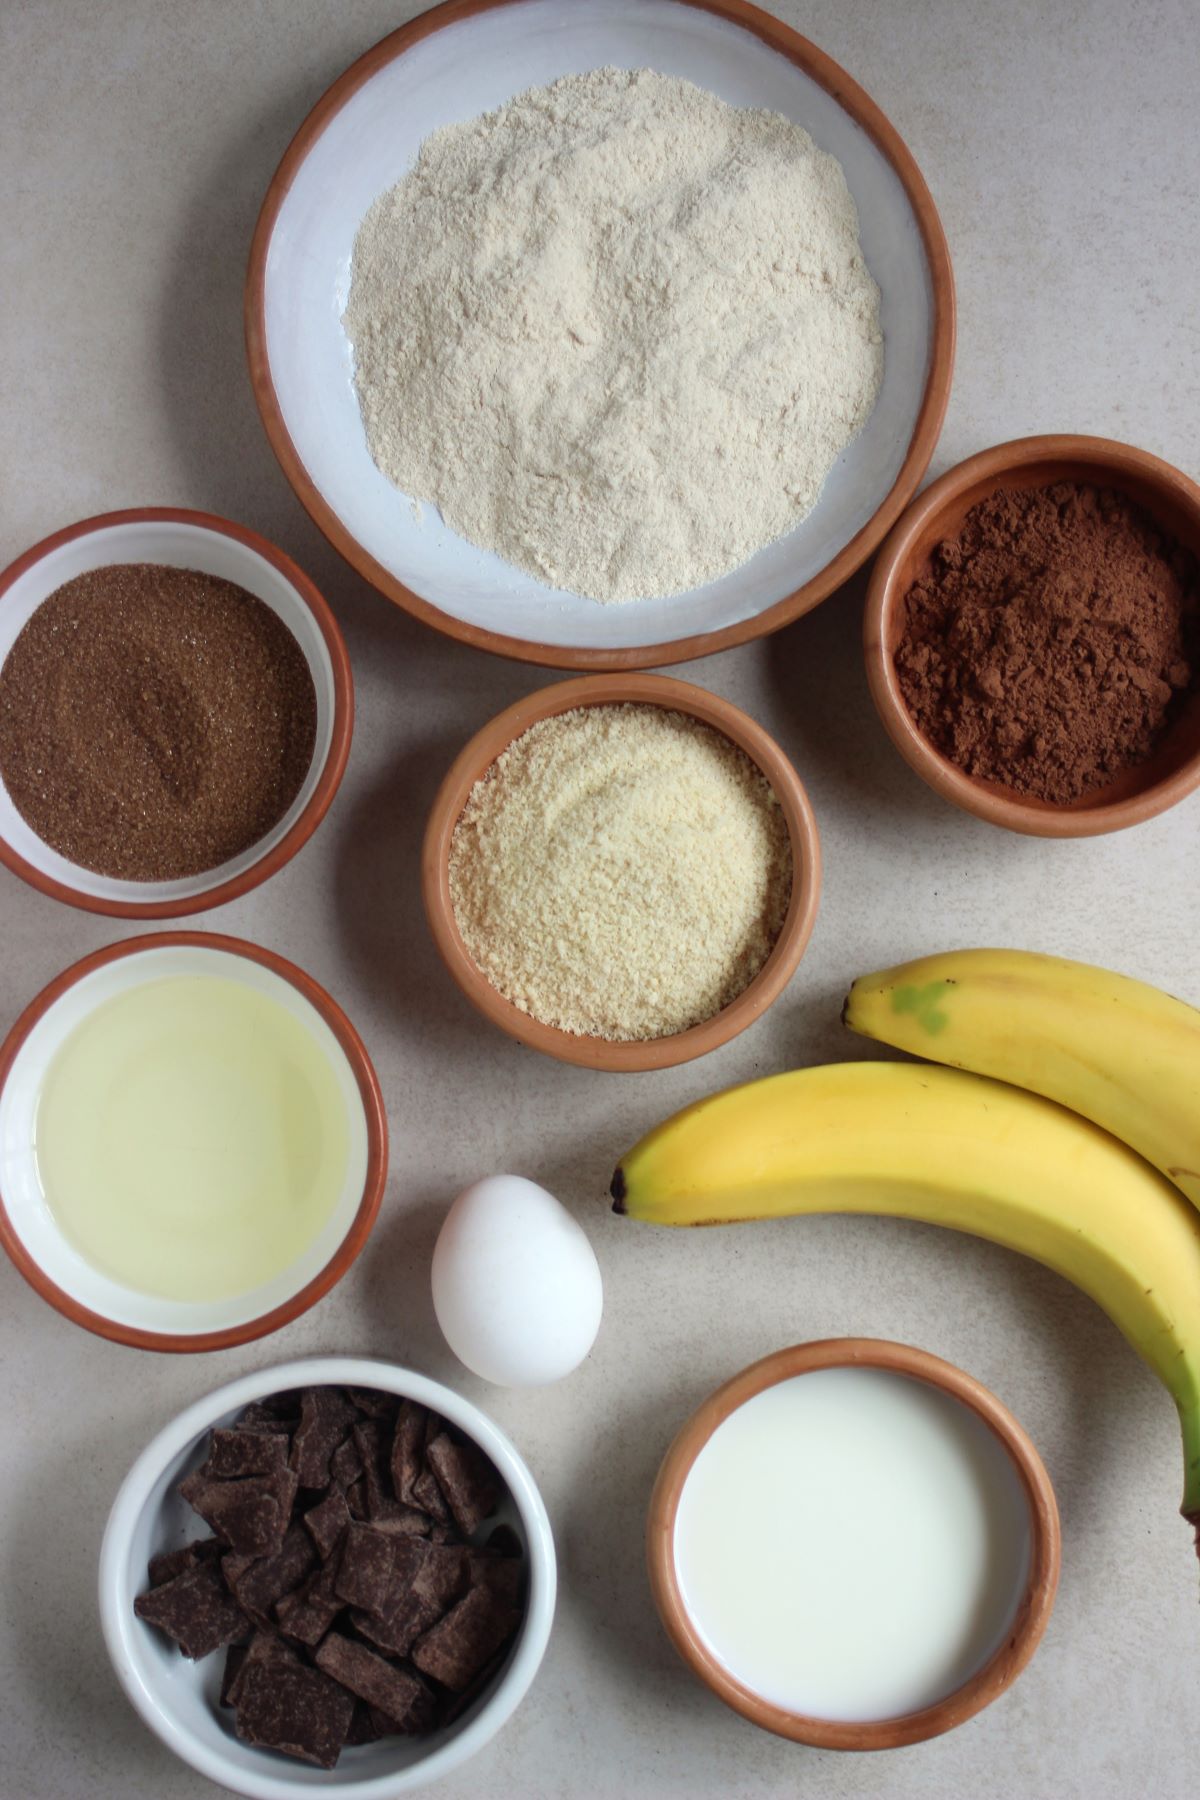 Chocolate banana muffins ingredients on different plates seen from above.